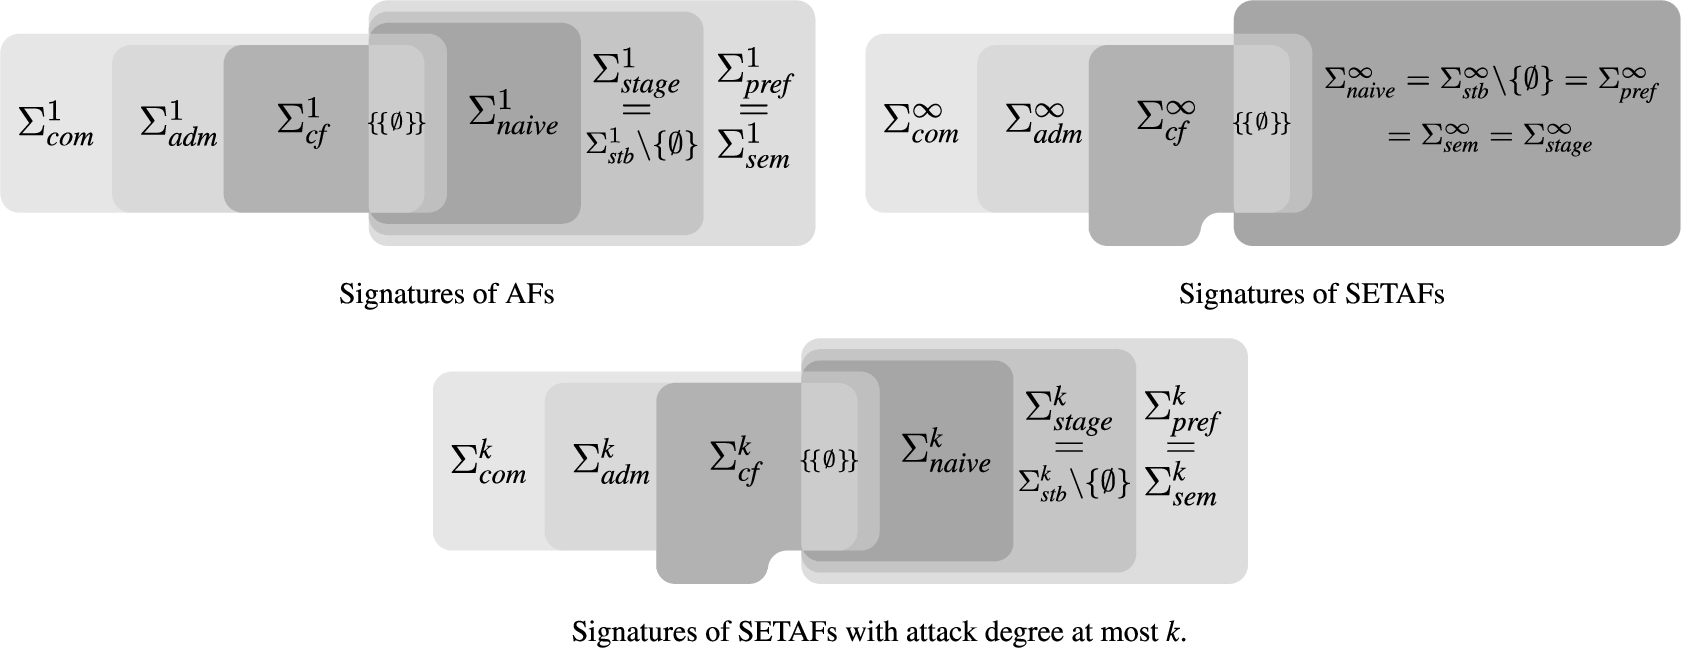 Summary of results: the Venn diagrams illustrate the relations between the signatures of the different semantics in AFs (Σσ1), SETAFs (Σσ∞), and SETAFs with attacks of degree at most k (Σσk).